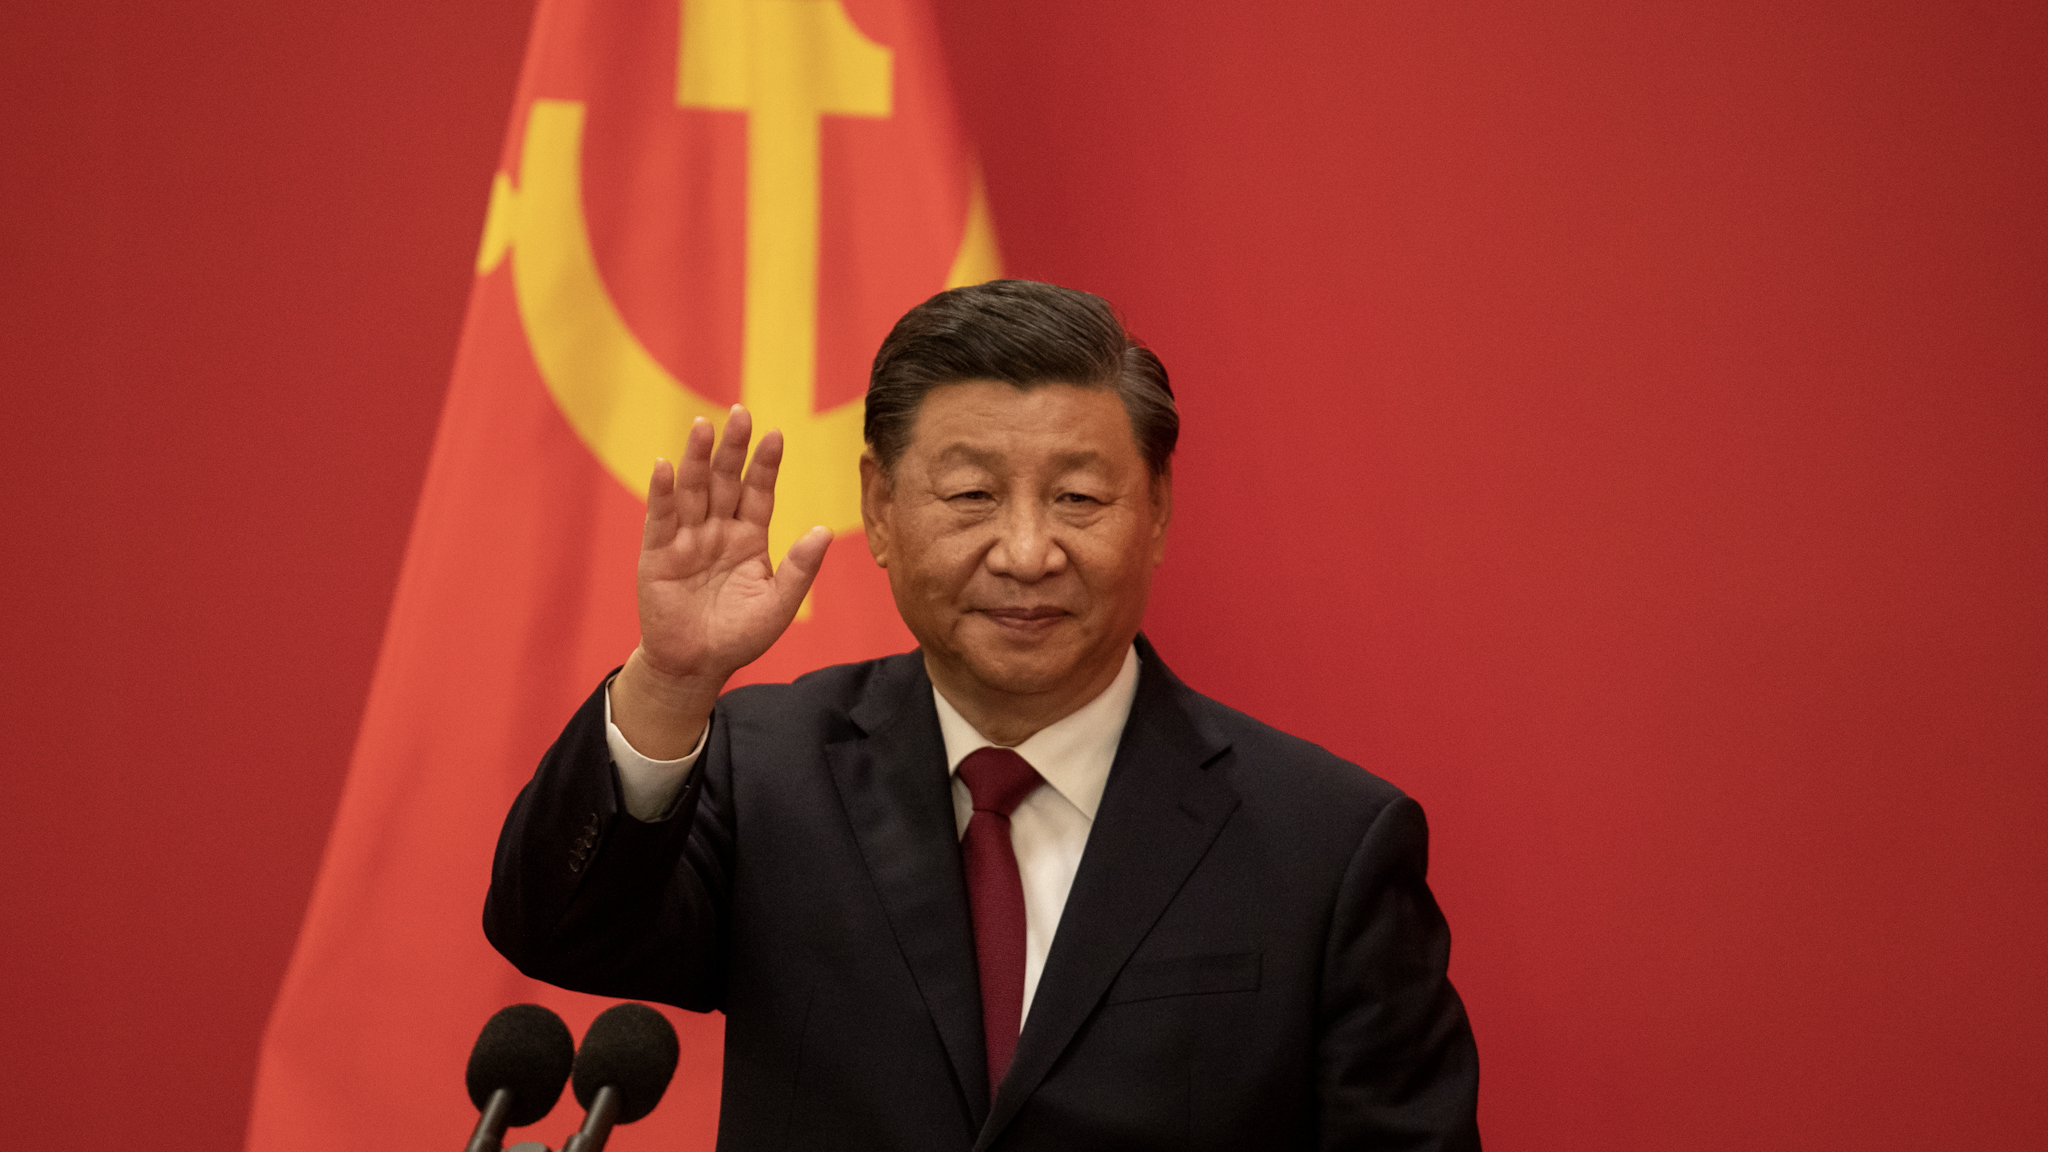 Xi Jinping, China's president, during the unveiling of the Communist Party of China's new Politburo Standing Committee at the Great Hall of the People in Beijing, China, on Sunday, Oct. 23, 2022. President Xi Jinping stacked China's most powerful body with his allies, giving him unfettered control over the world's second-largest economy.